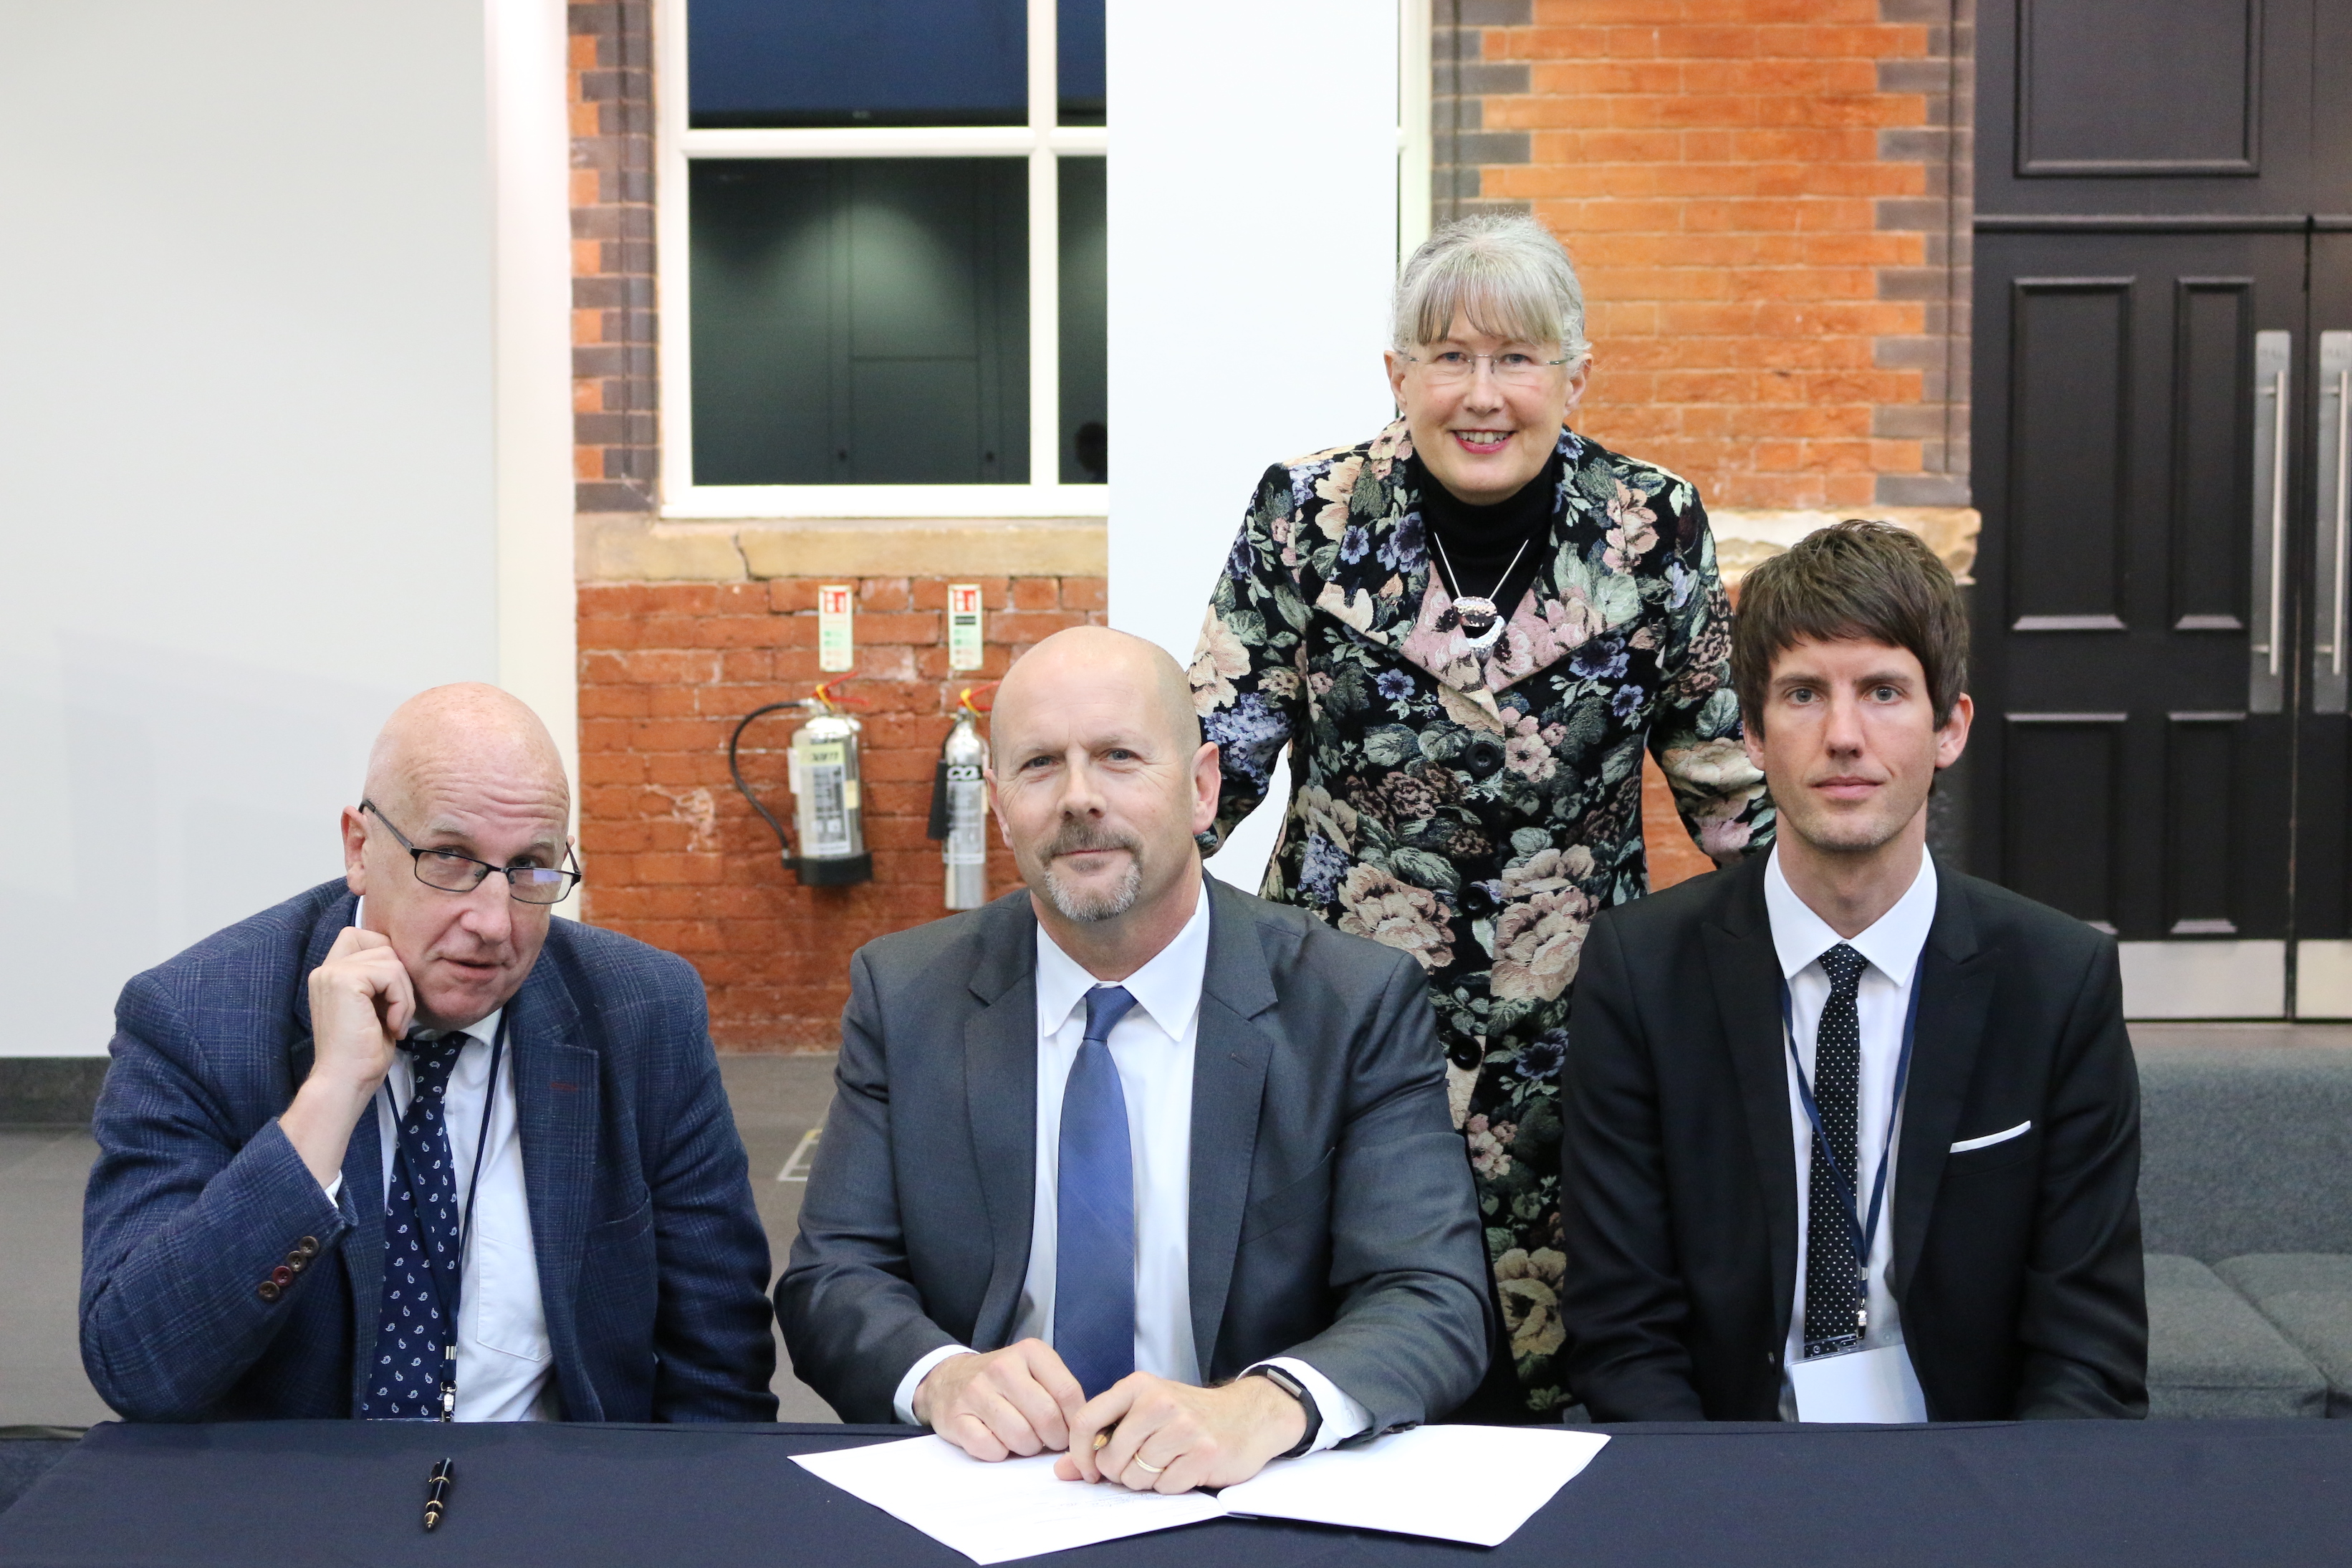 Representatives of Briovation, Health Innovation Manchester, and Manchester's Oxford Road Corridor sign the MOU Initiating an agreement to facilitate healthcare innovation in the UK and US.